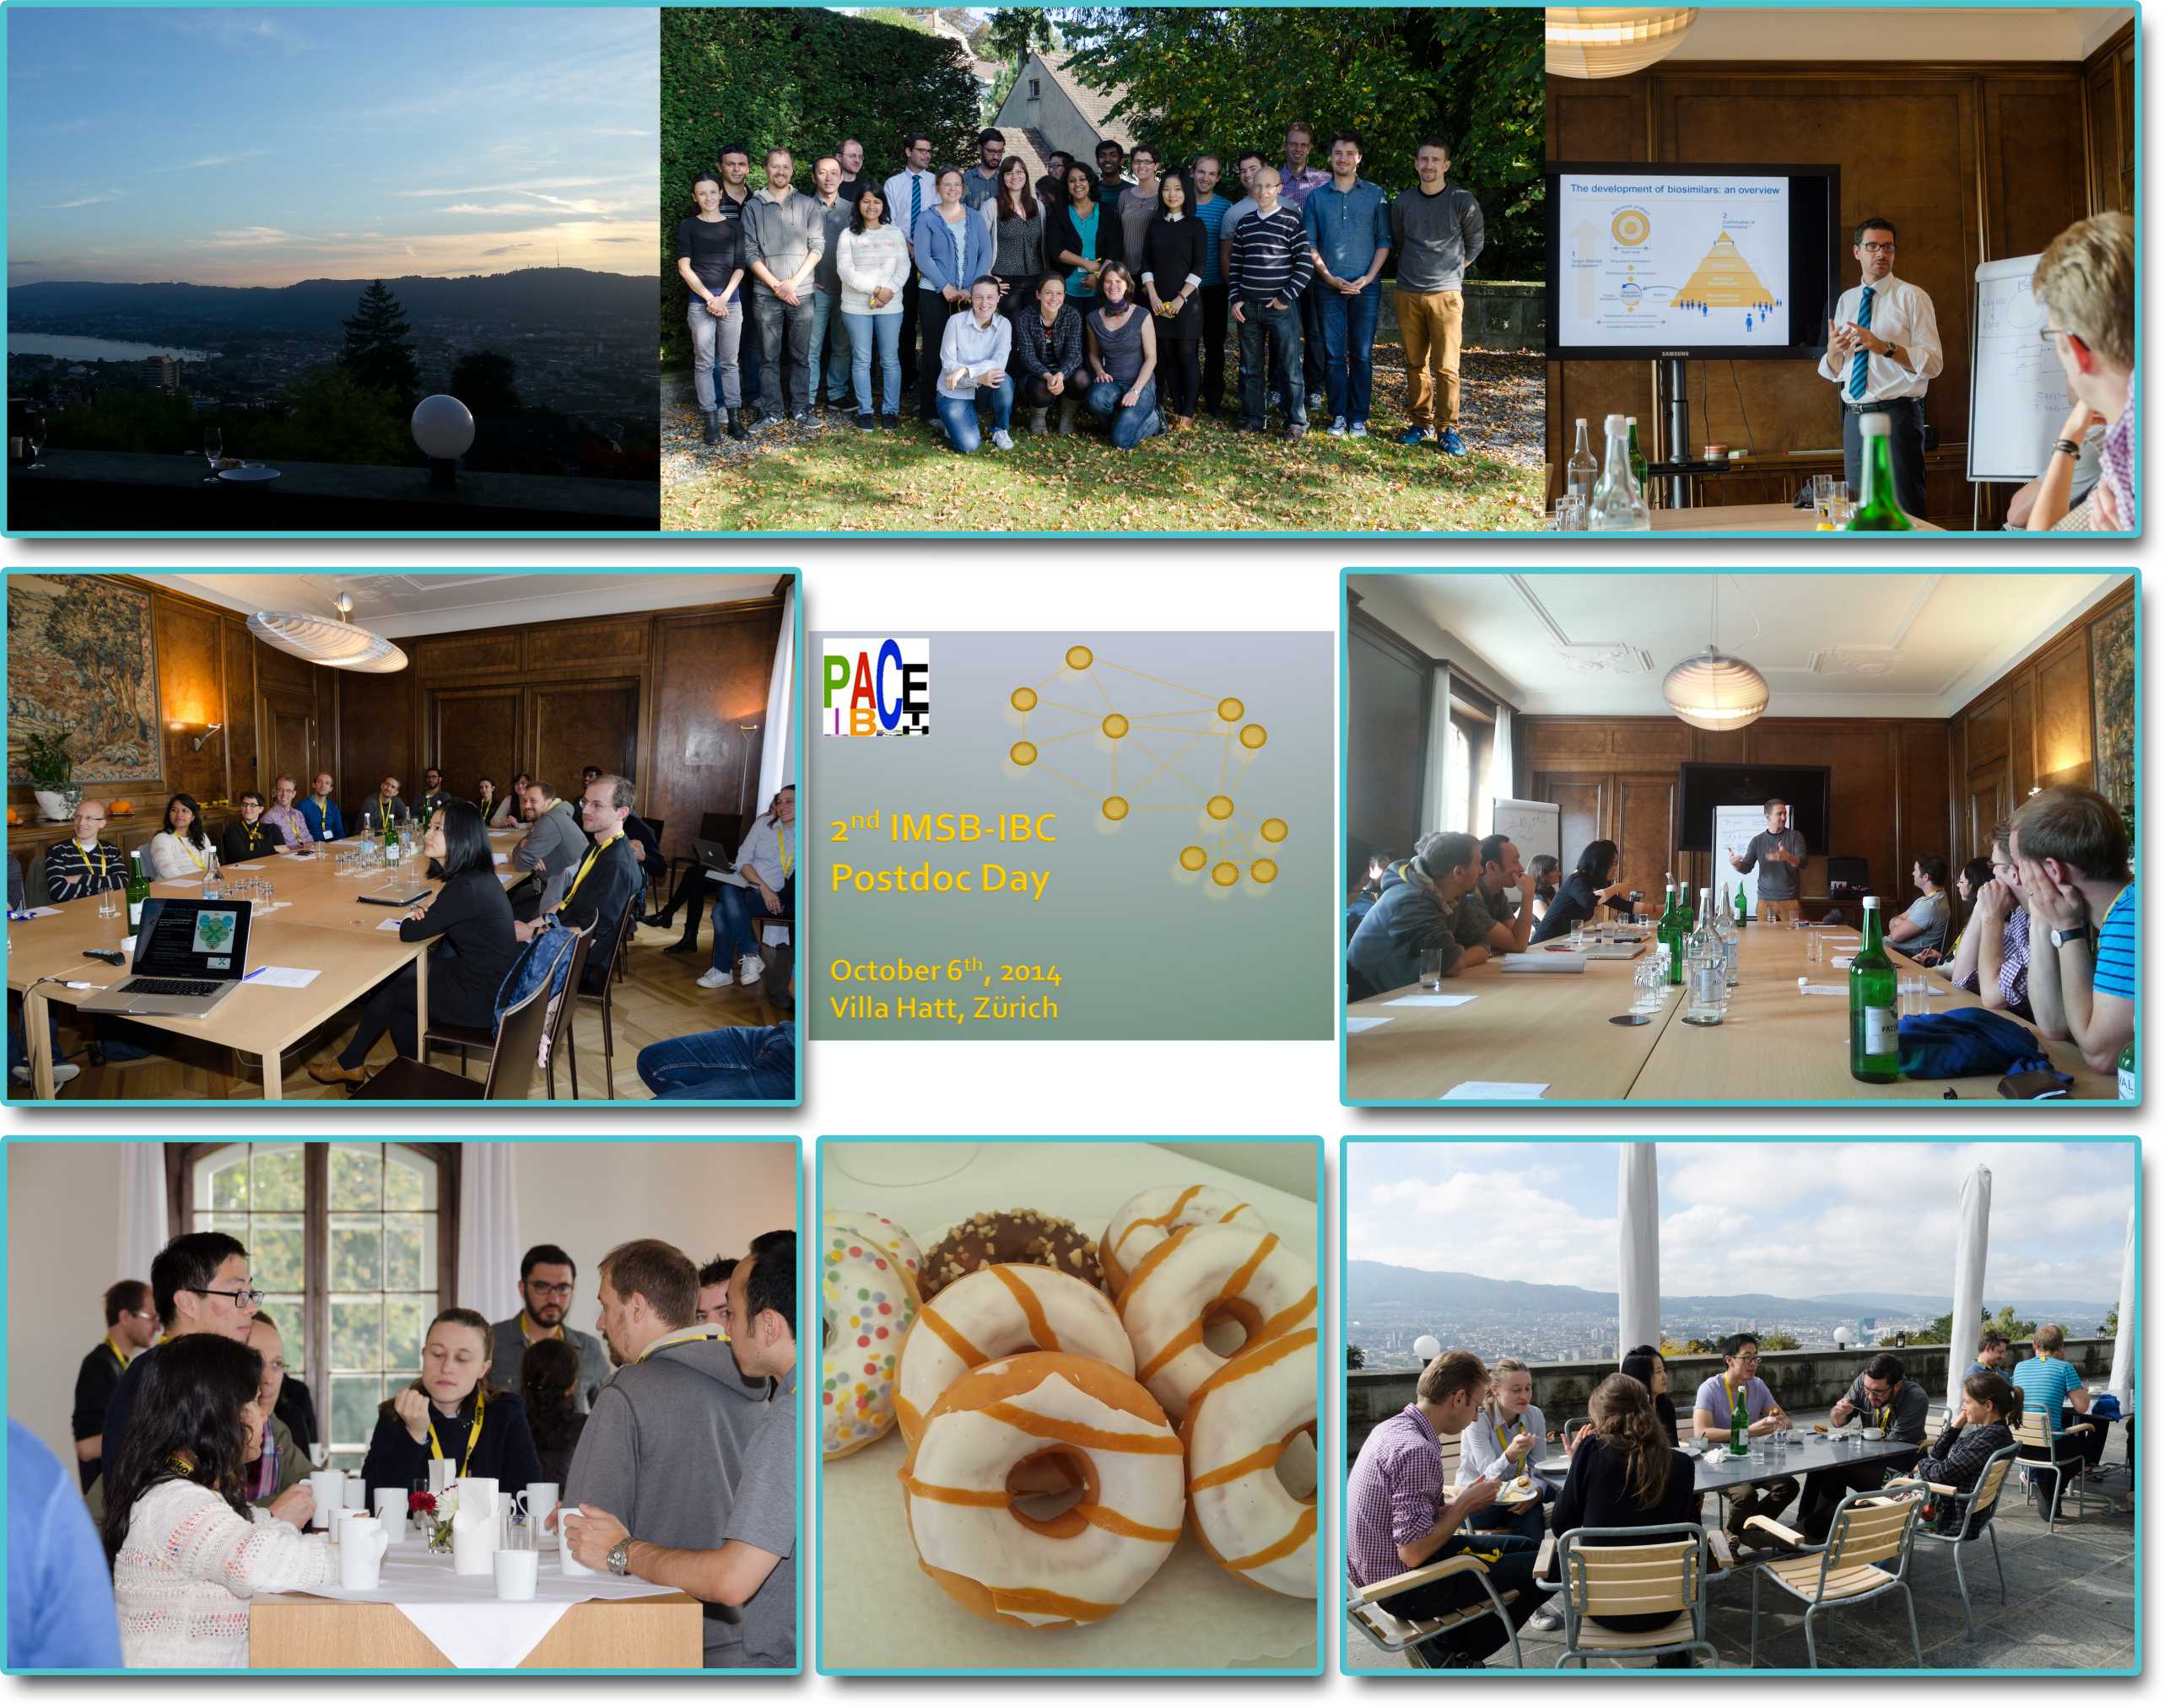 Enlarged view: Joint IMSB-IBC Postdoc Day 2014